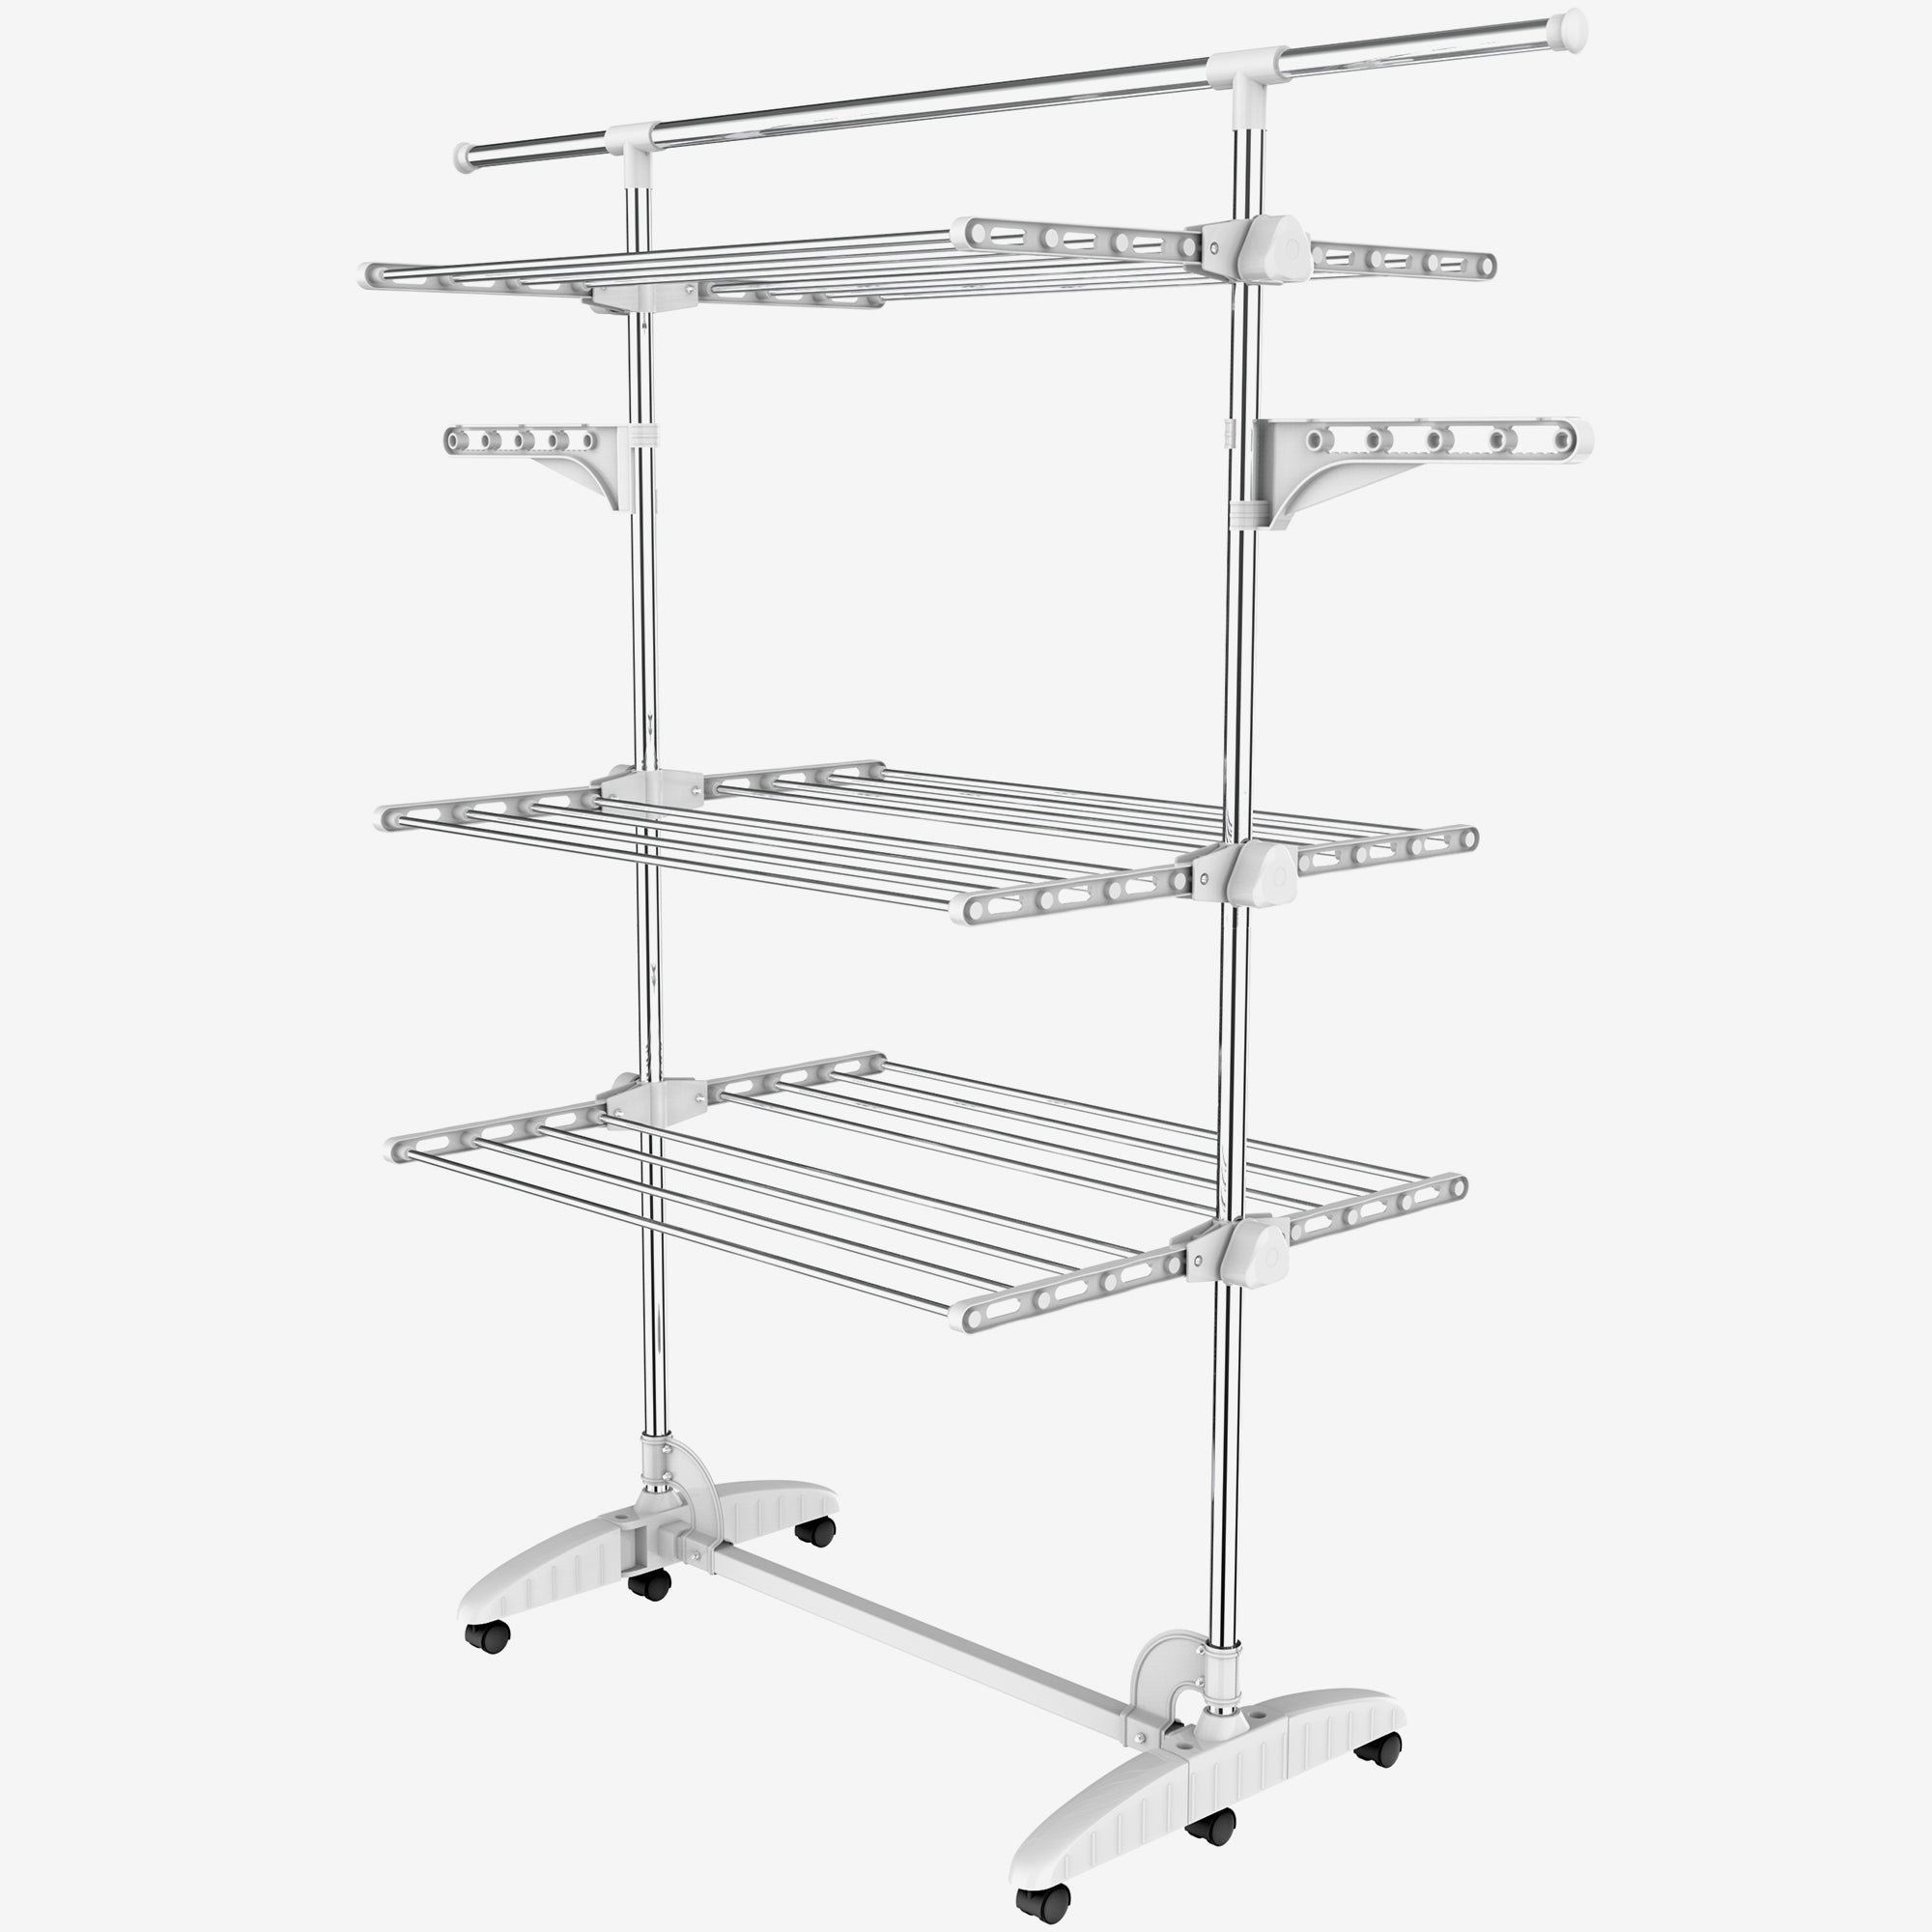 Clothes-Drying-Rack-3-shelves-with-extendable-top-bar-White-Clothes-Drying-Rack-3-shelves-White-With-wings-and-extended-top-bar-Material-Stainless-steel-tubes